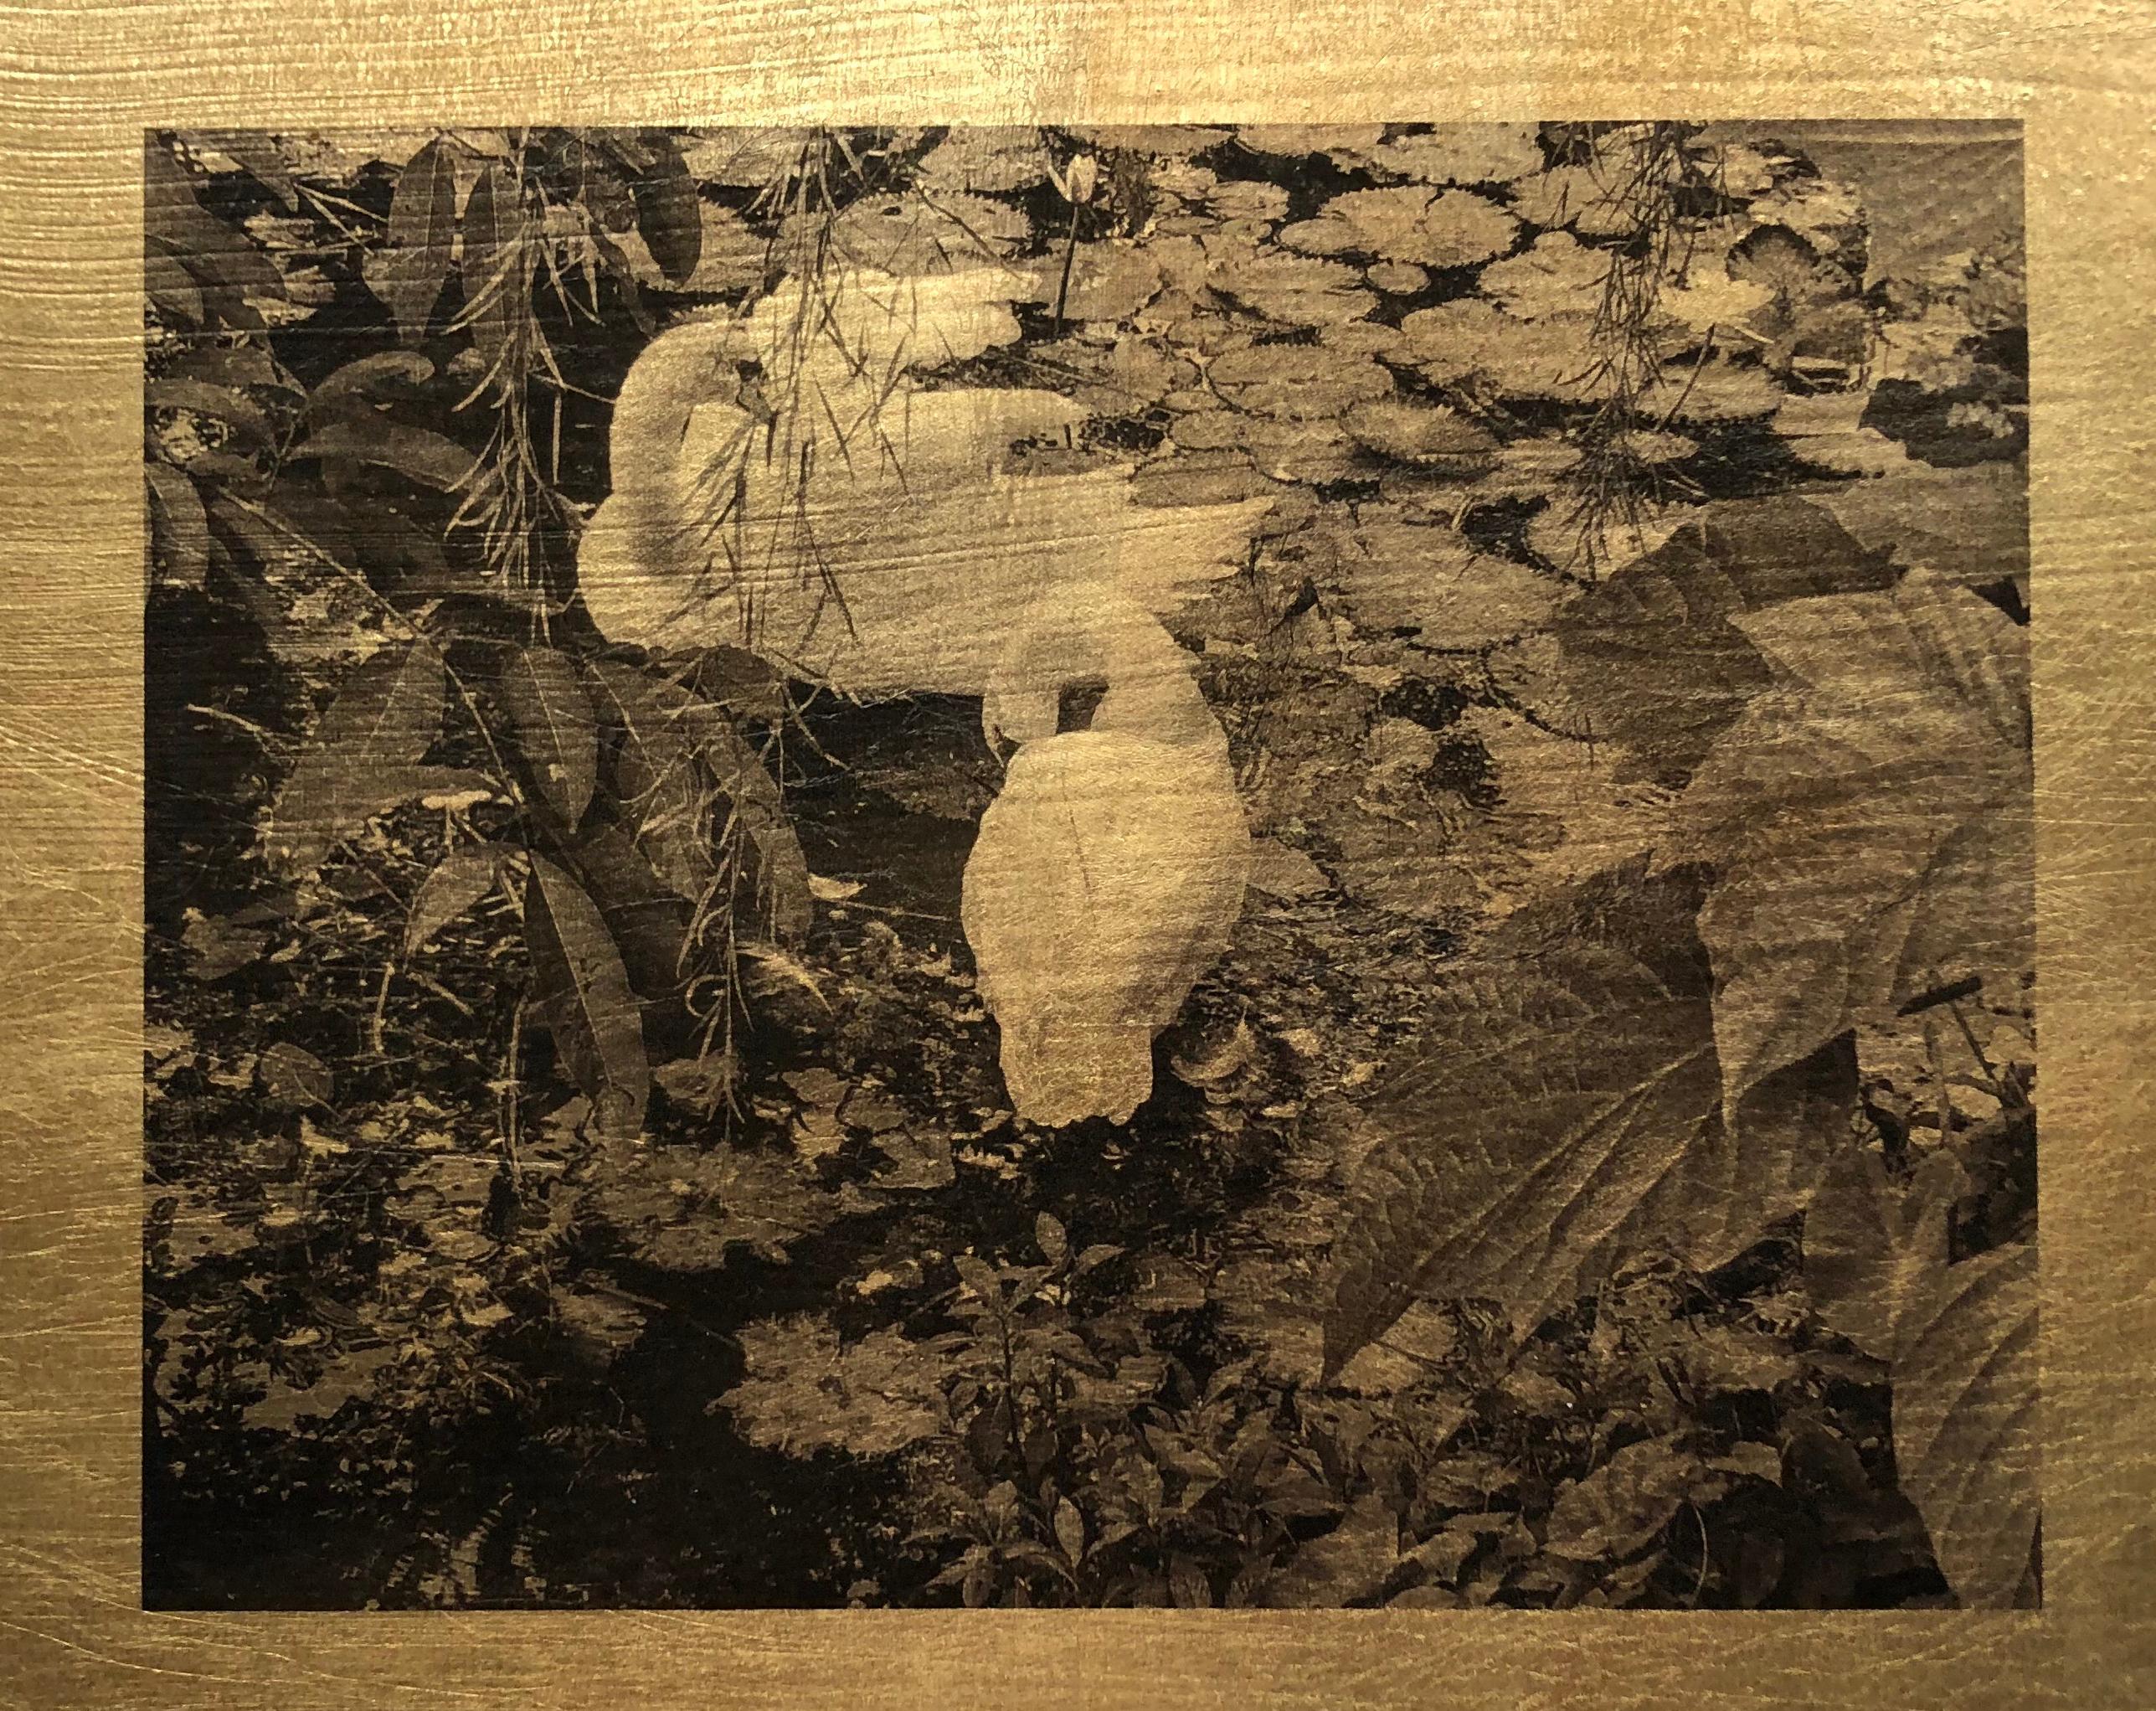 A horizontal photographic print on gold leaf of graceful swans by Anne Muller. Muller - a self-taught artist - practices photography, painting, and textile art, and imbues her photographic work with a creative sense of color and texture. In this